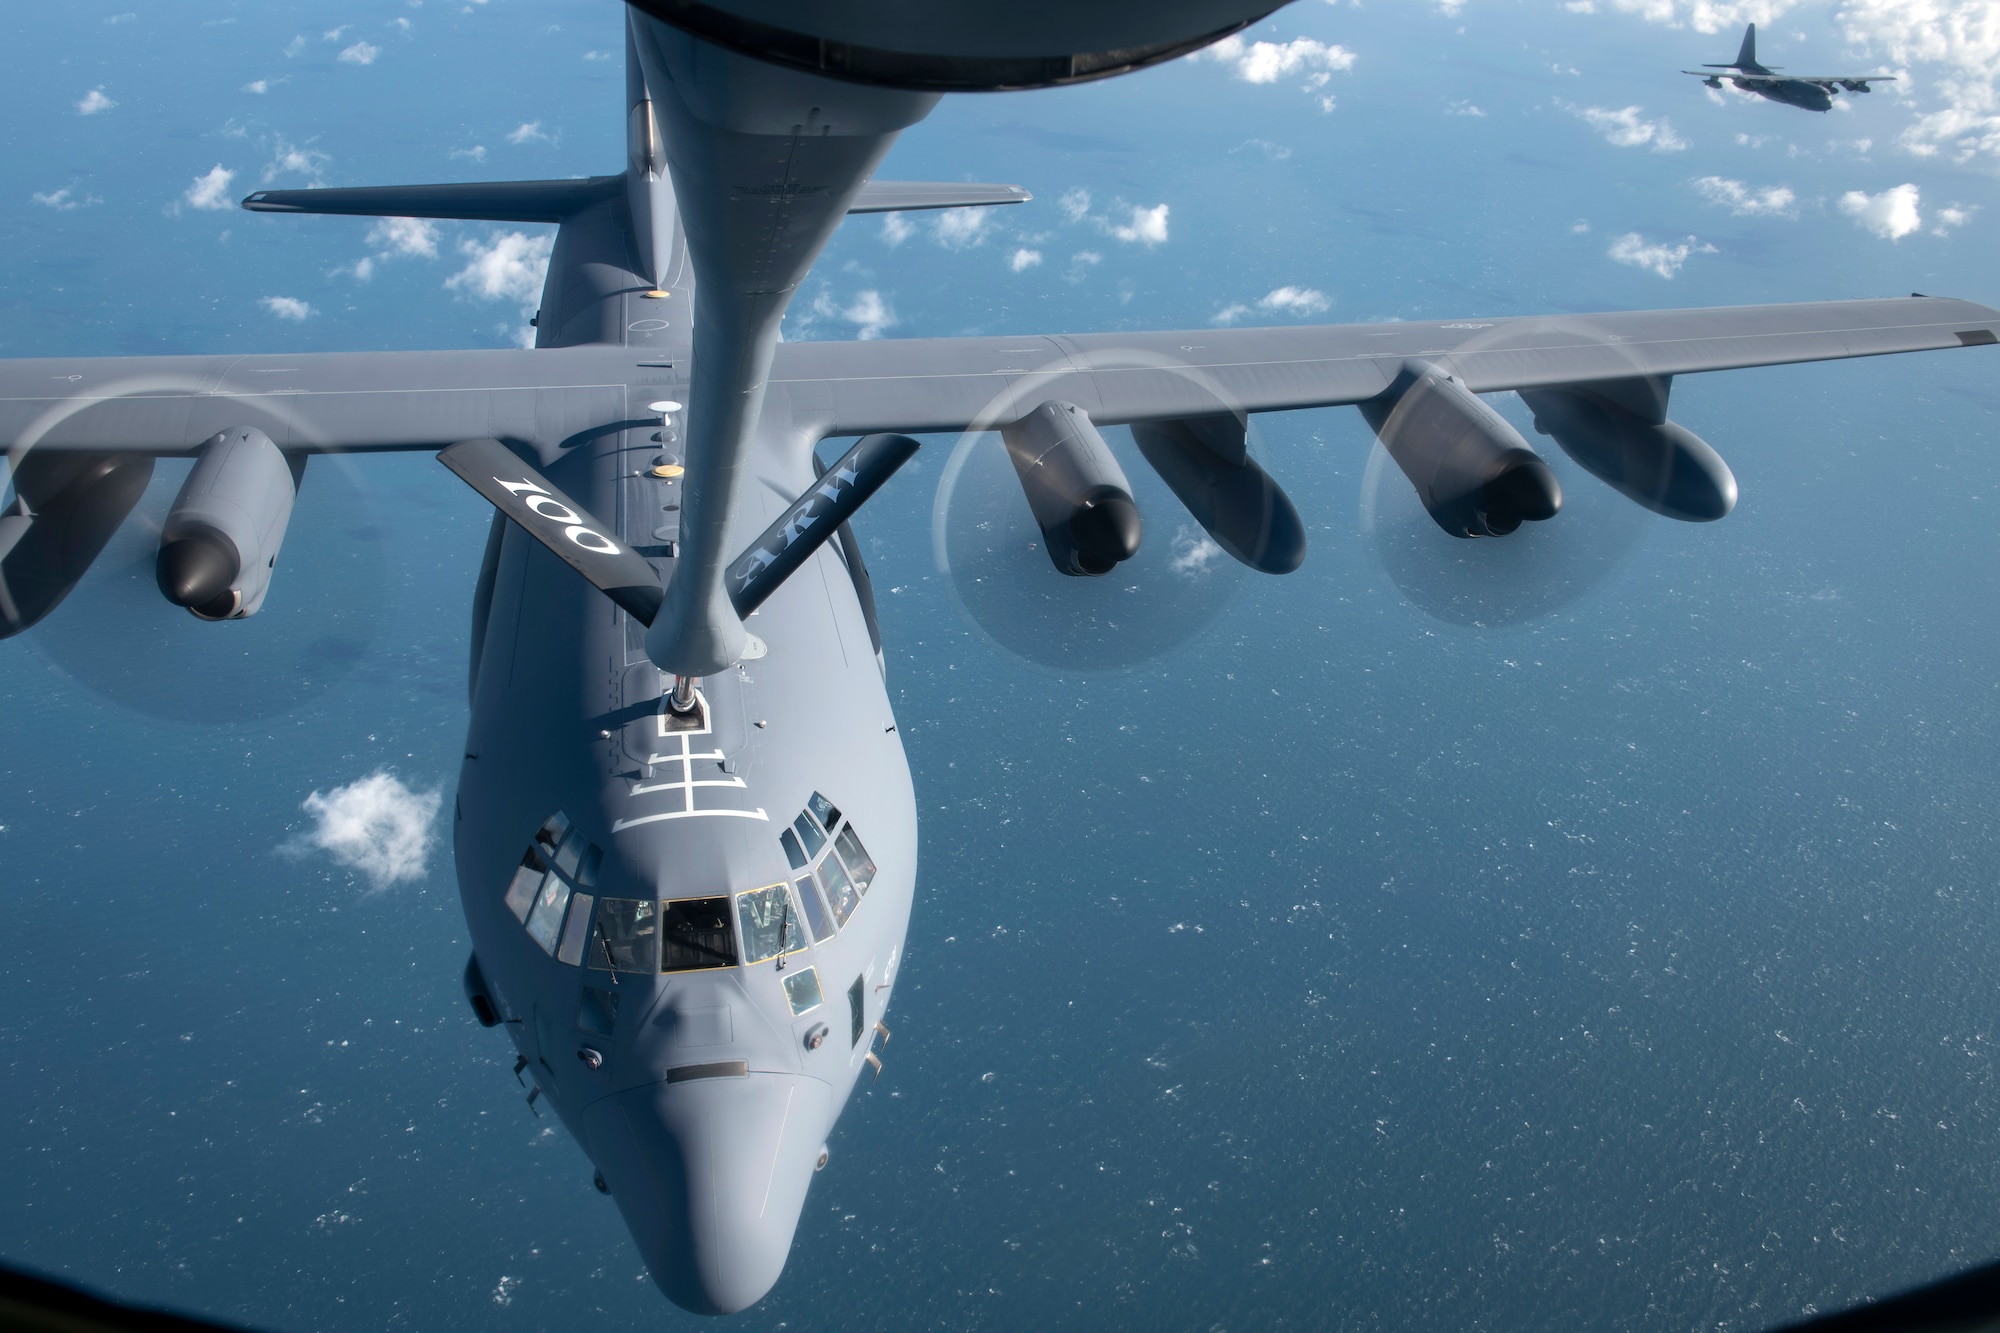 An MC-130J Commando II assigned to the 352d Special Operations Wing, RAF Mildenhall, England receives fuel from a KC-135 Stratotanker from the 100th Air Refueling Wing, RAF Mildenhall, England, Oct. 10, 2019.